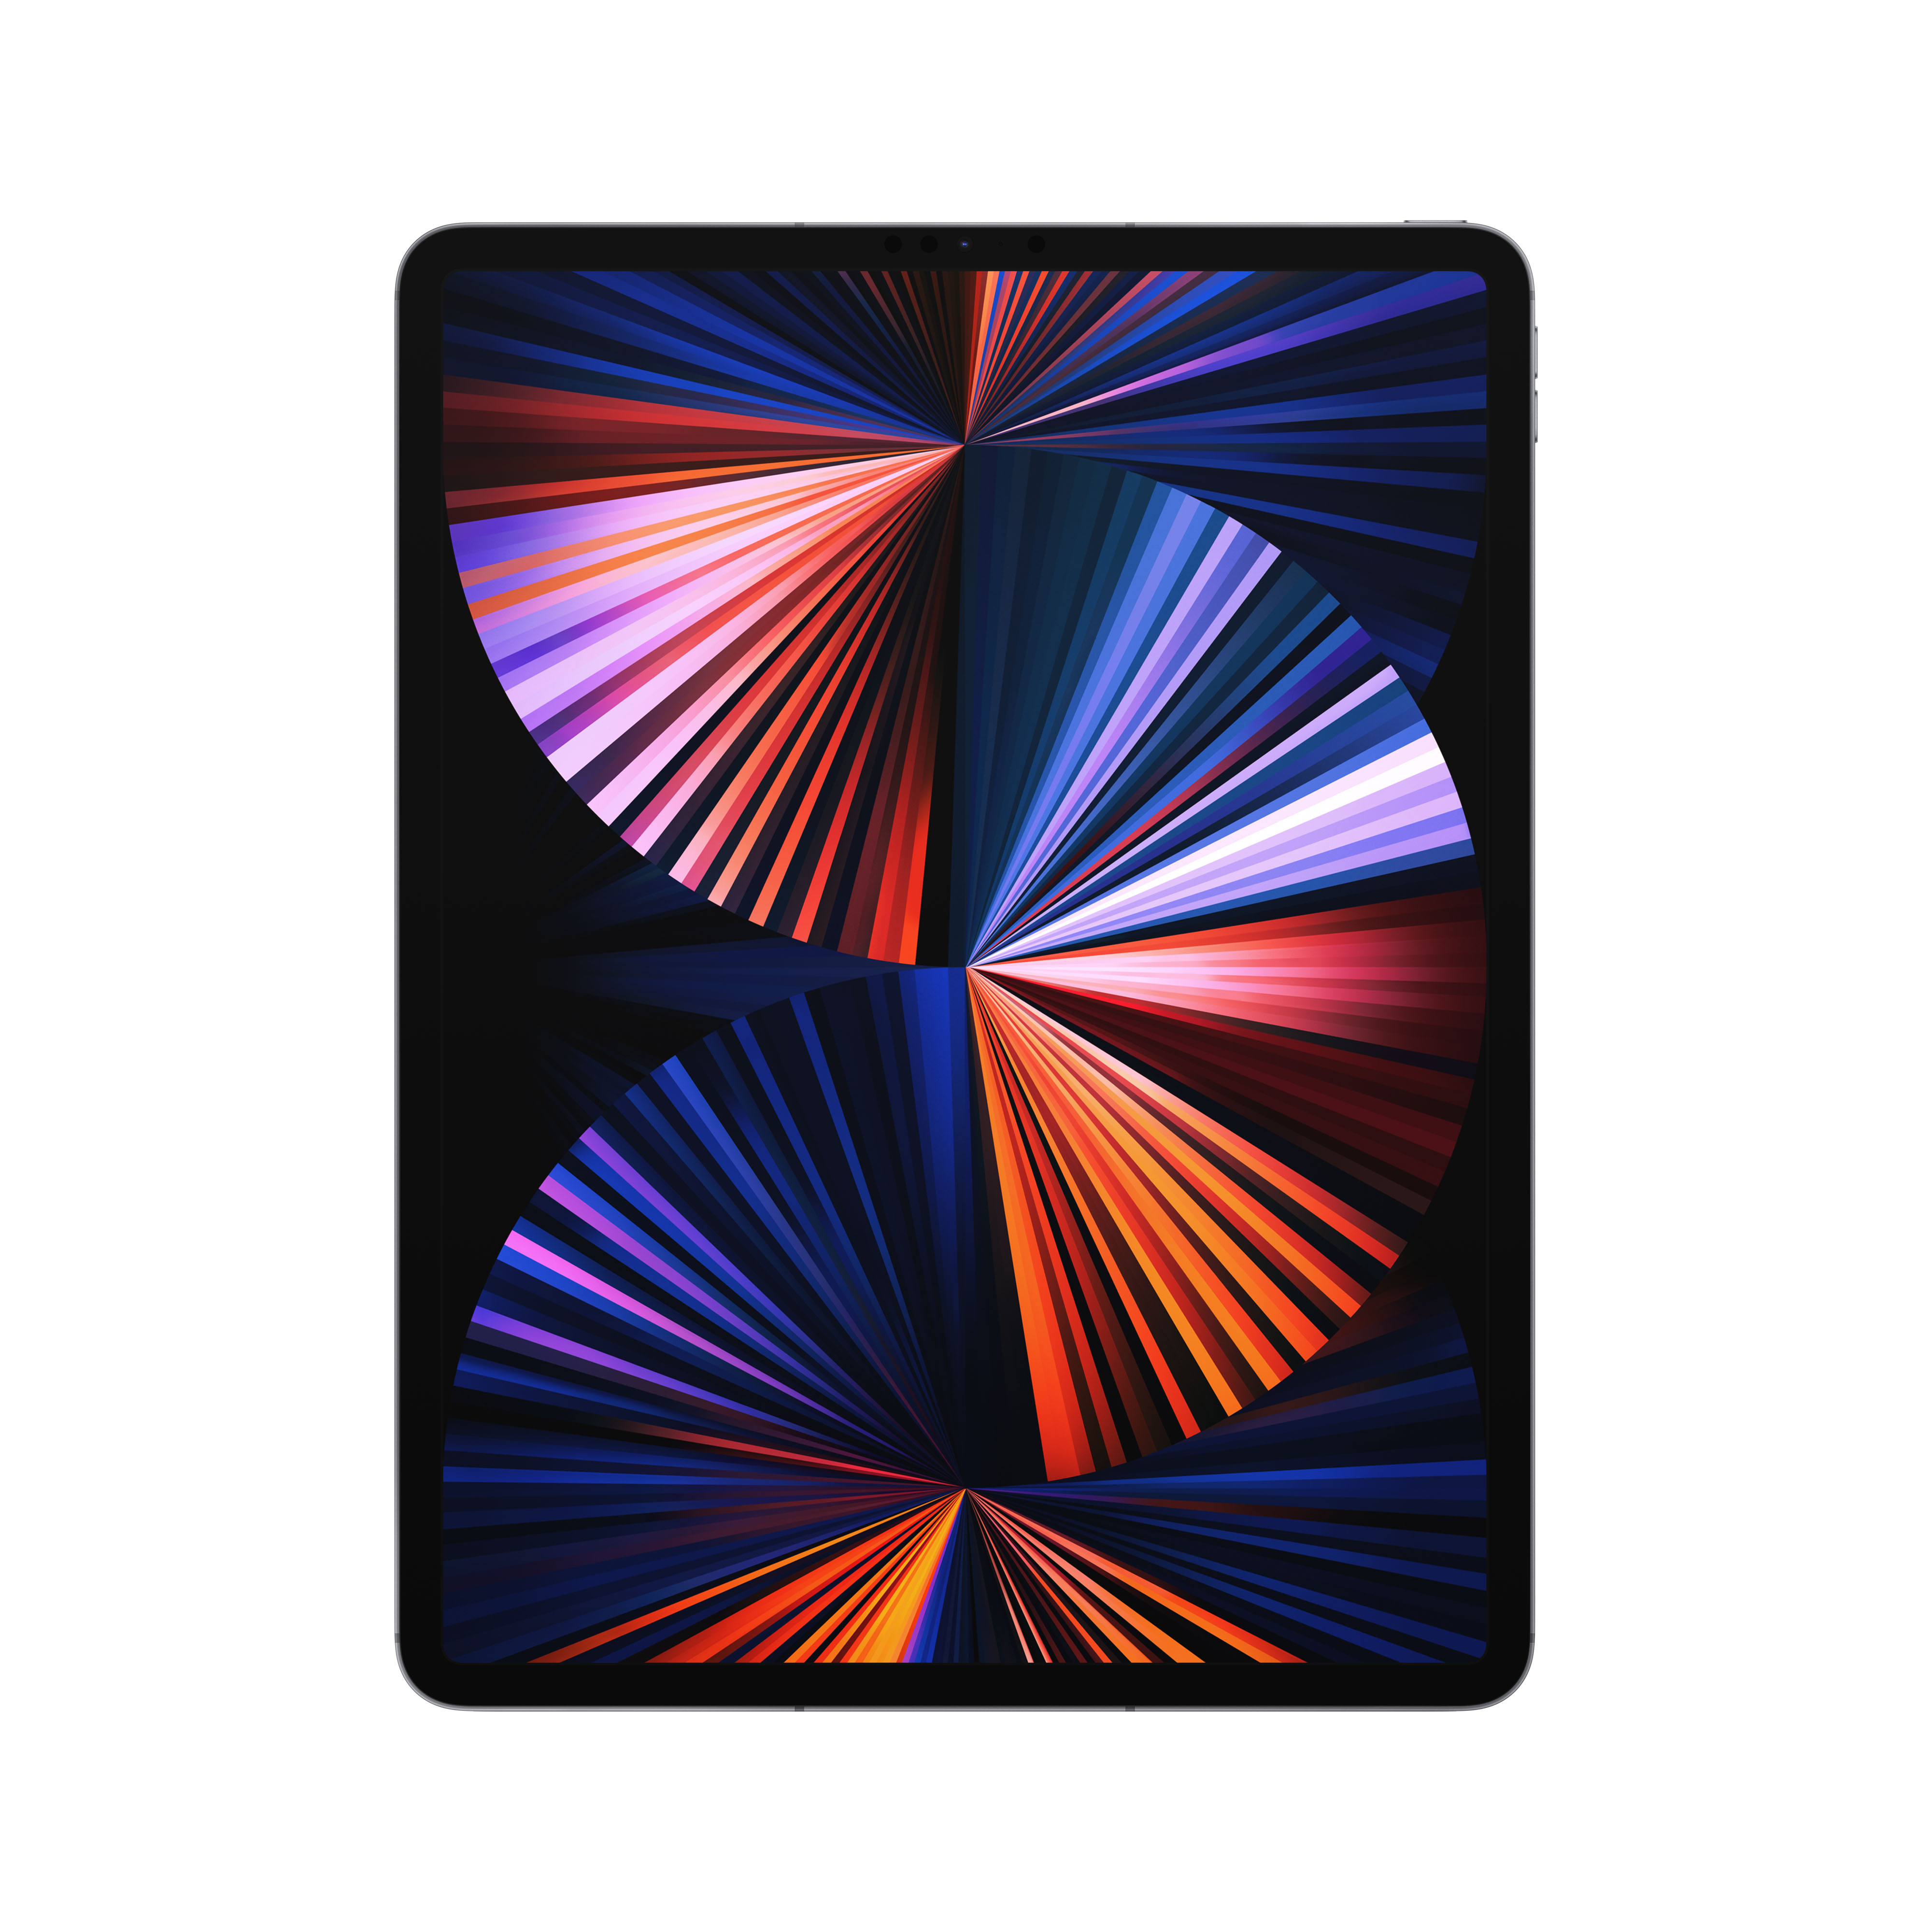 12.9-INCH IPAD PRO CELL 128GB - SPACE...